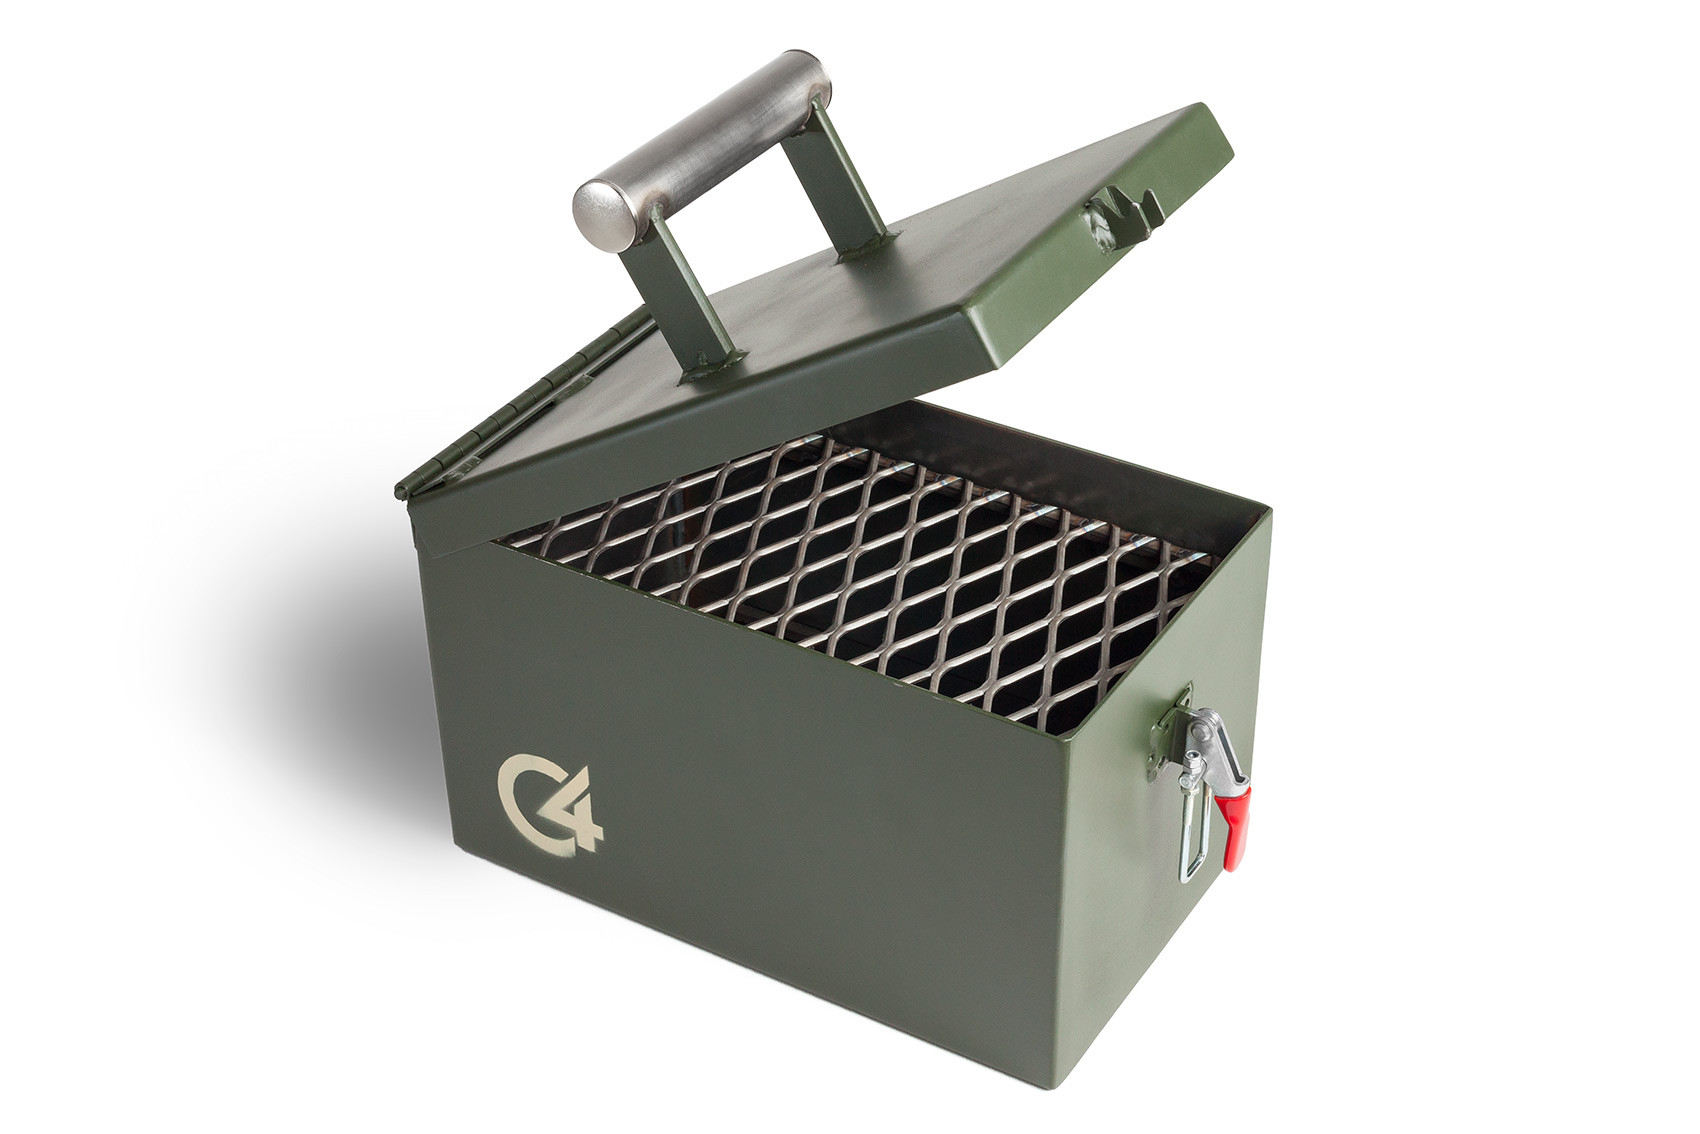 C4 Portable Grill Open